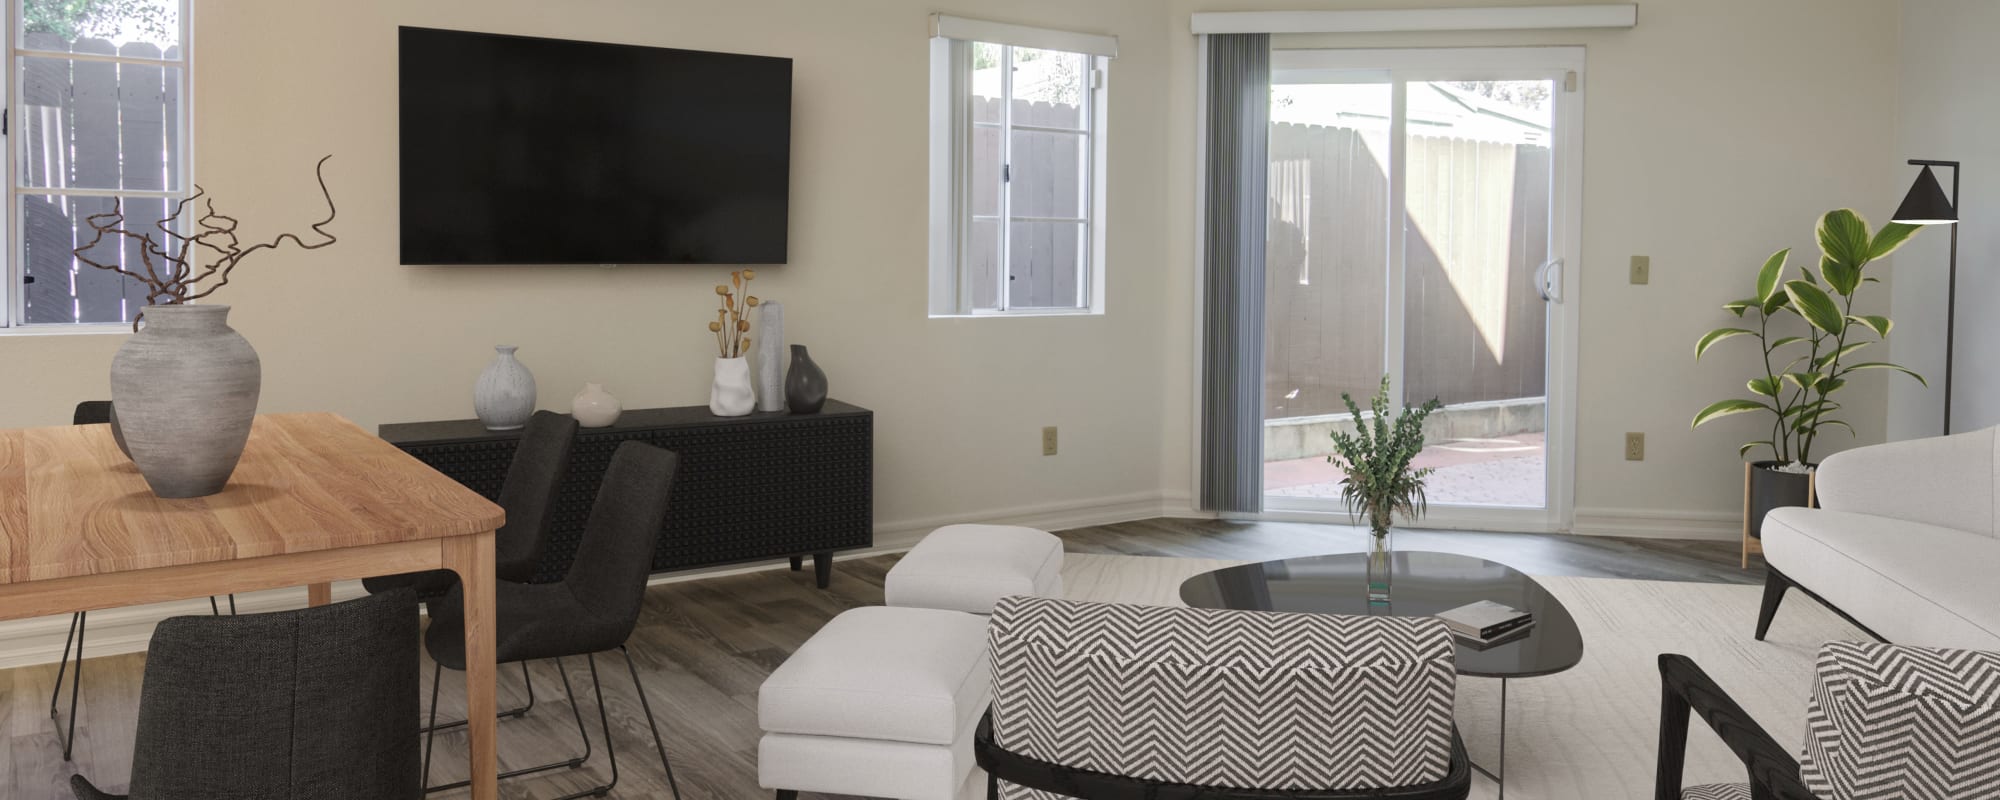 Livingroom at Holly Square in Imperial Beach, California